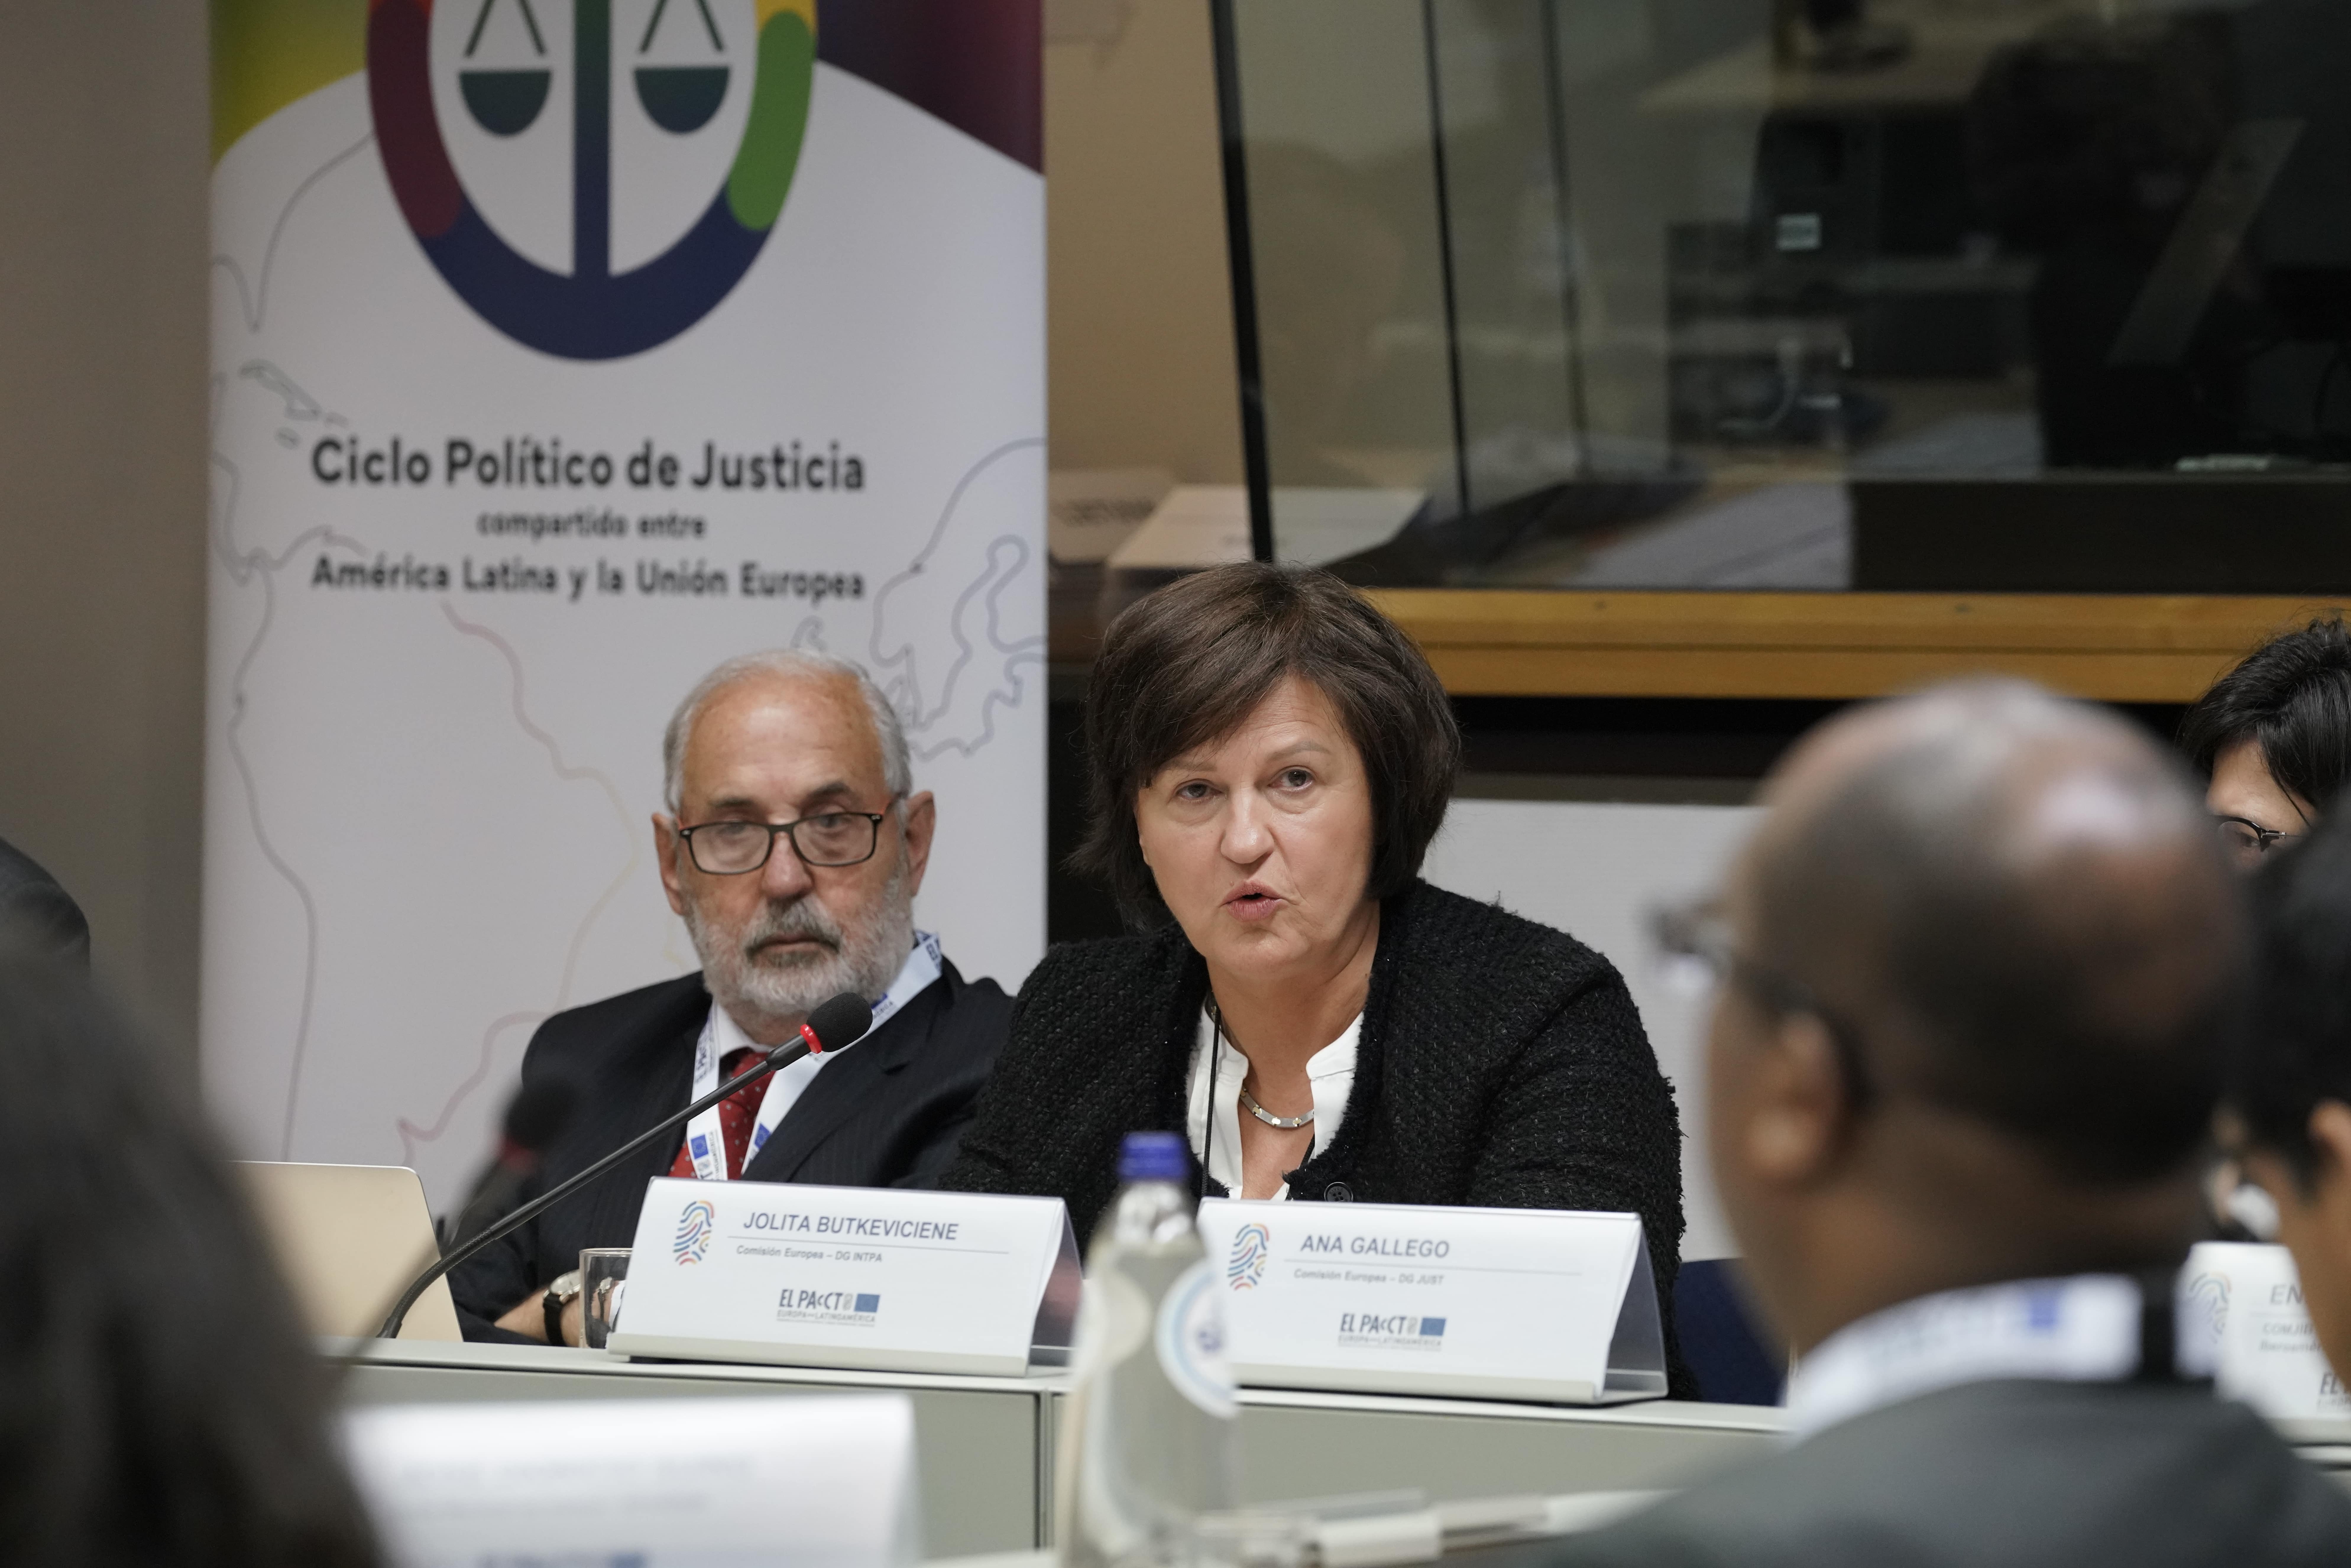 A Shared Political Cycle of Justice between Latin America and the European Union to facilitate criminal justice cooperation